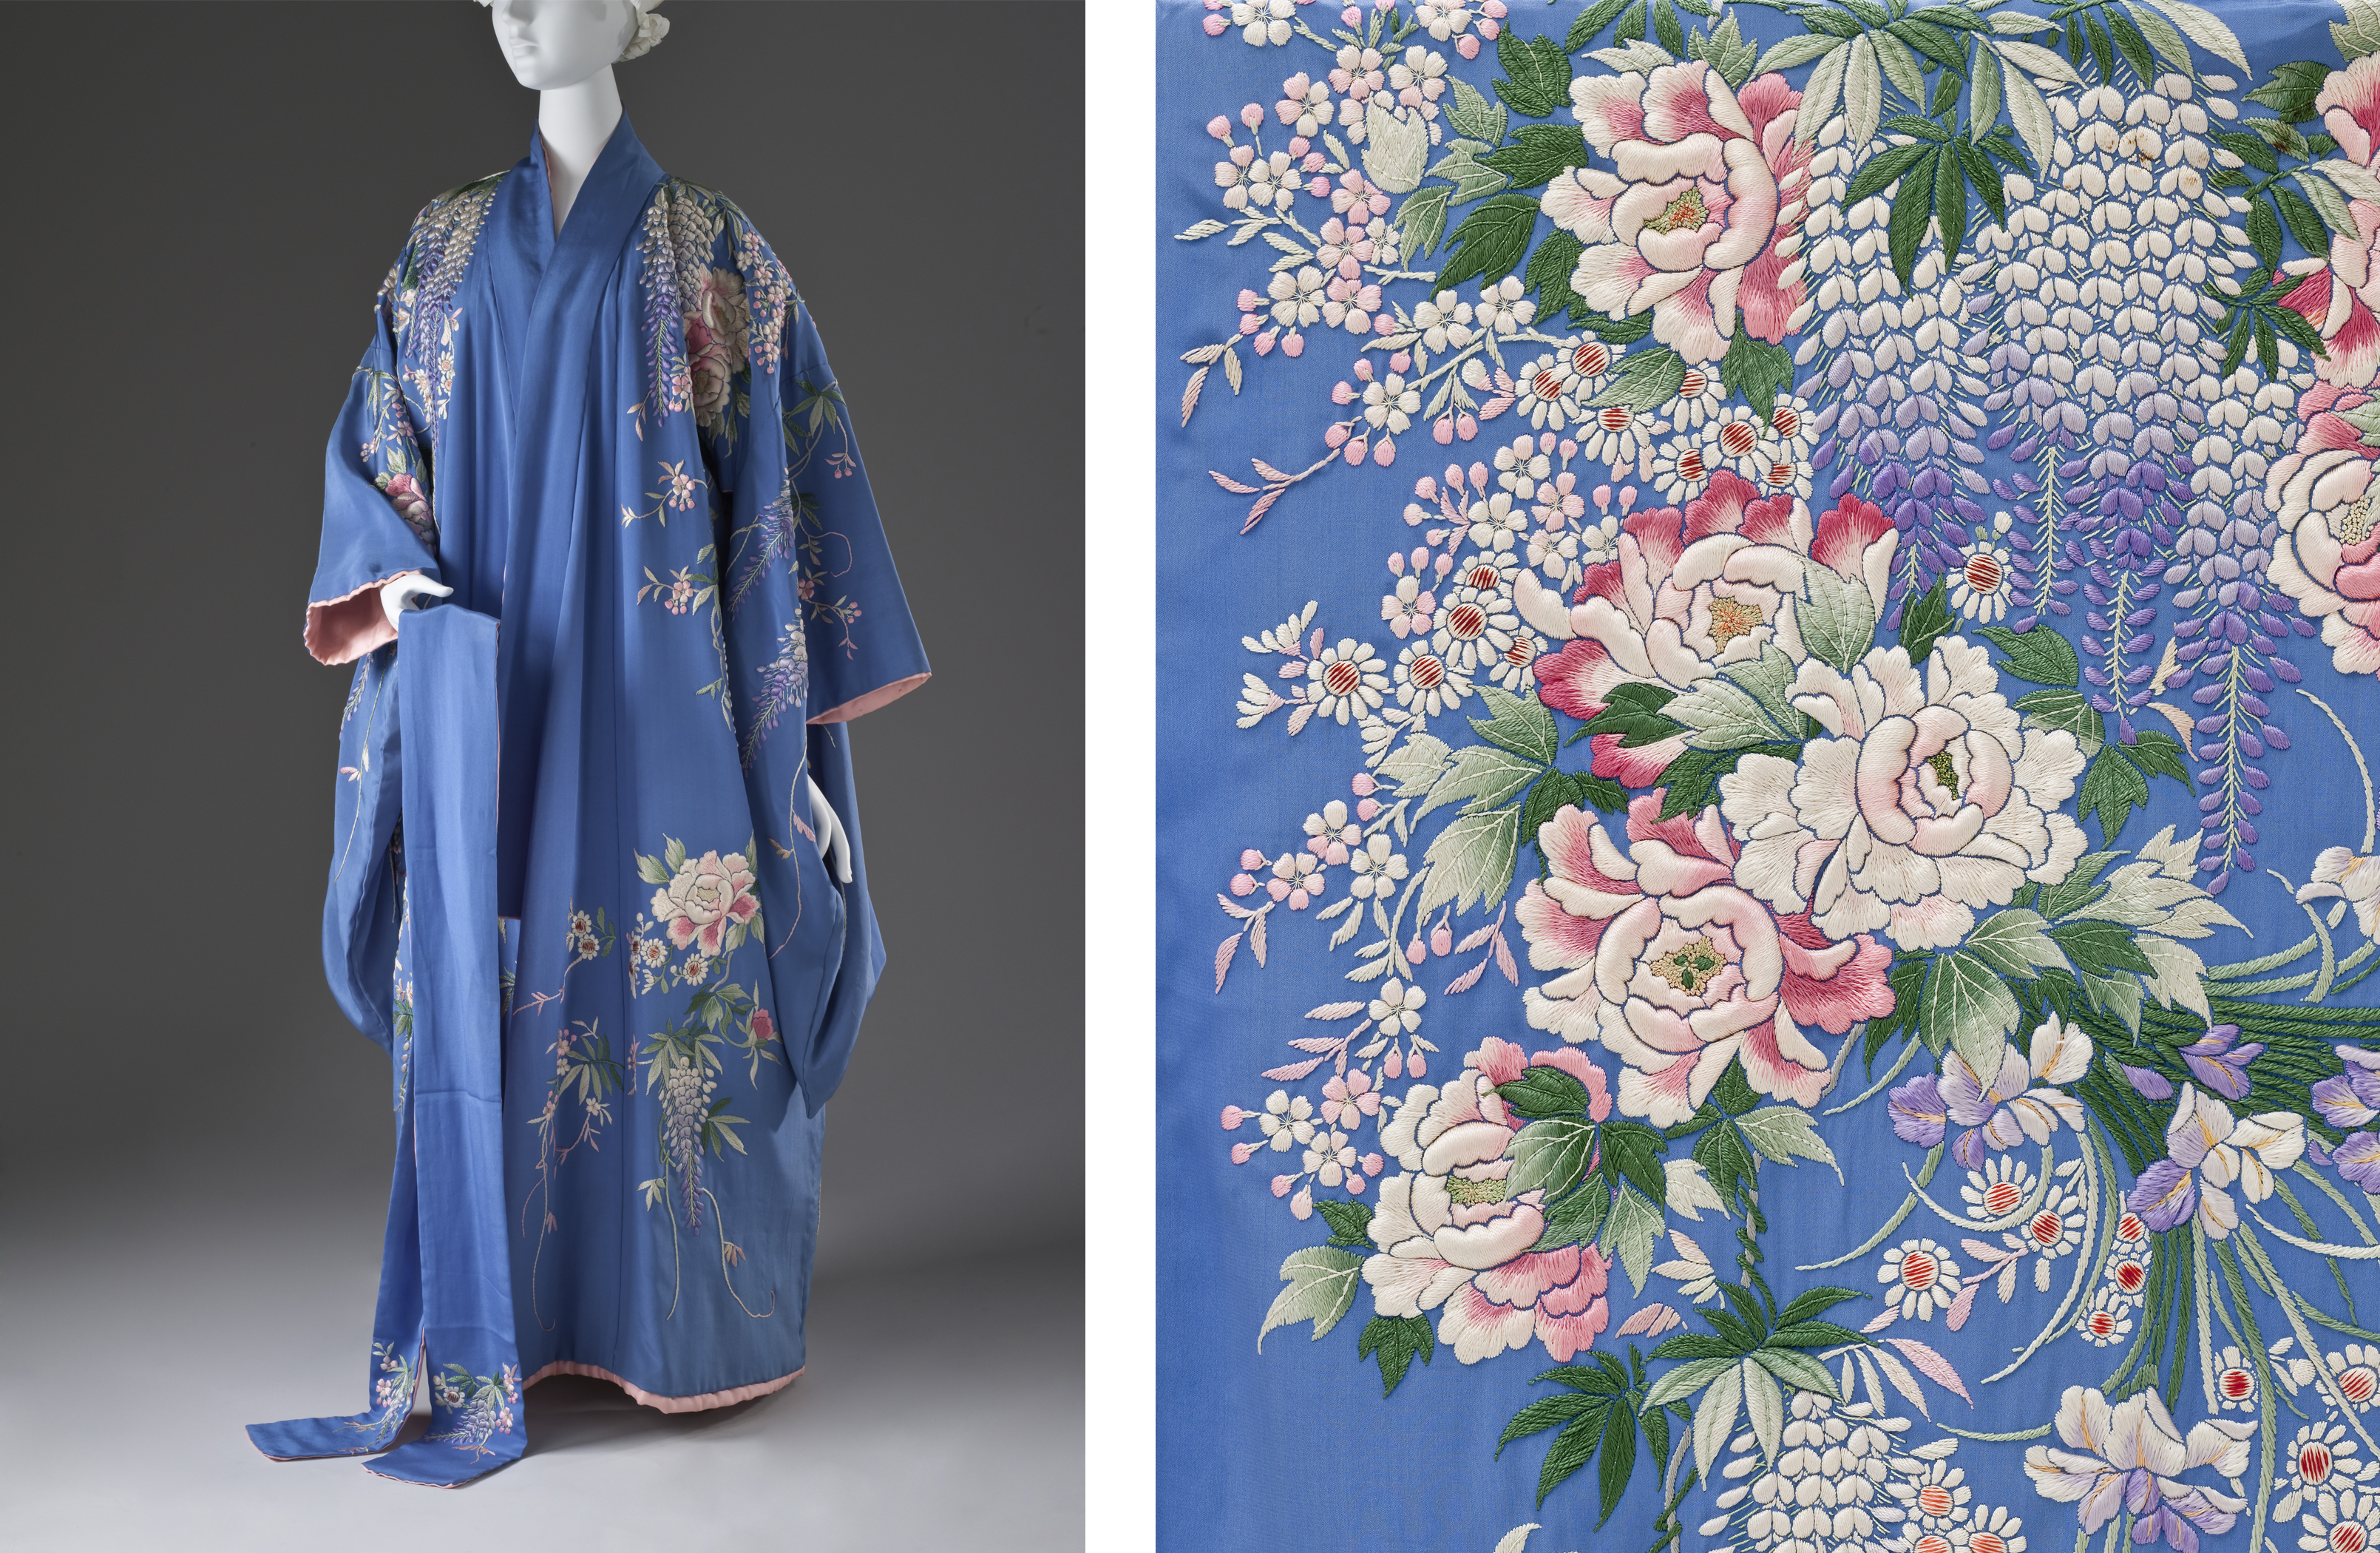 Woman's Dressing Gown (left: overall; right: detail), Japan for the Western market, late 19th–early 20th century, Los Angeles County Museum of Art, gift of Harry C. Dellar in memory of Muriel "Mitzie" and Janice Dellar, photos © Museum Associates/LACMA